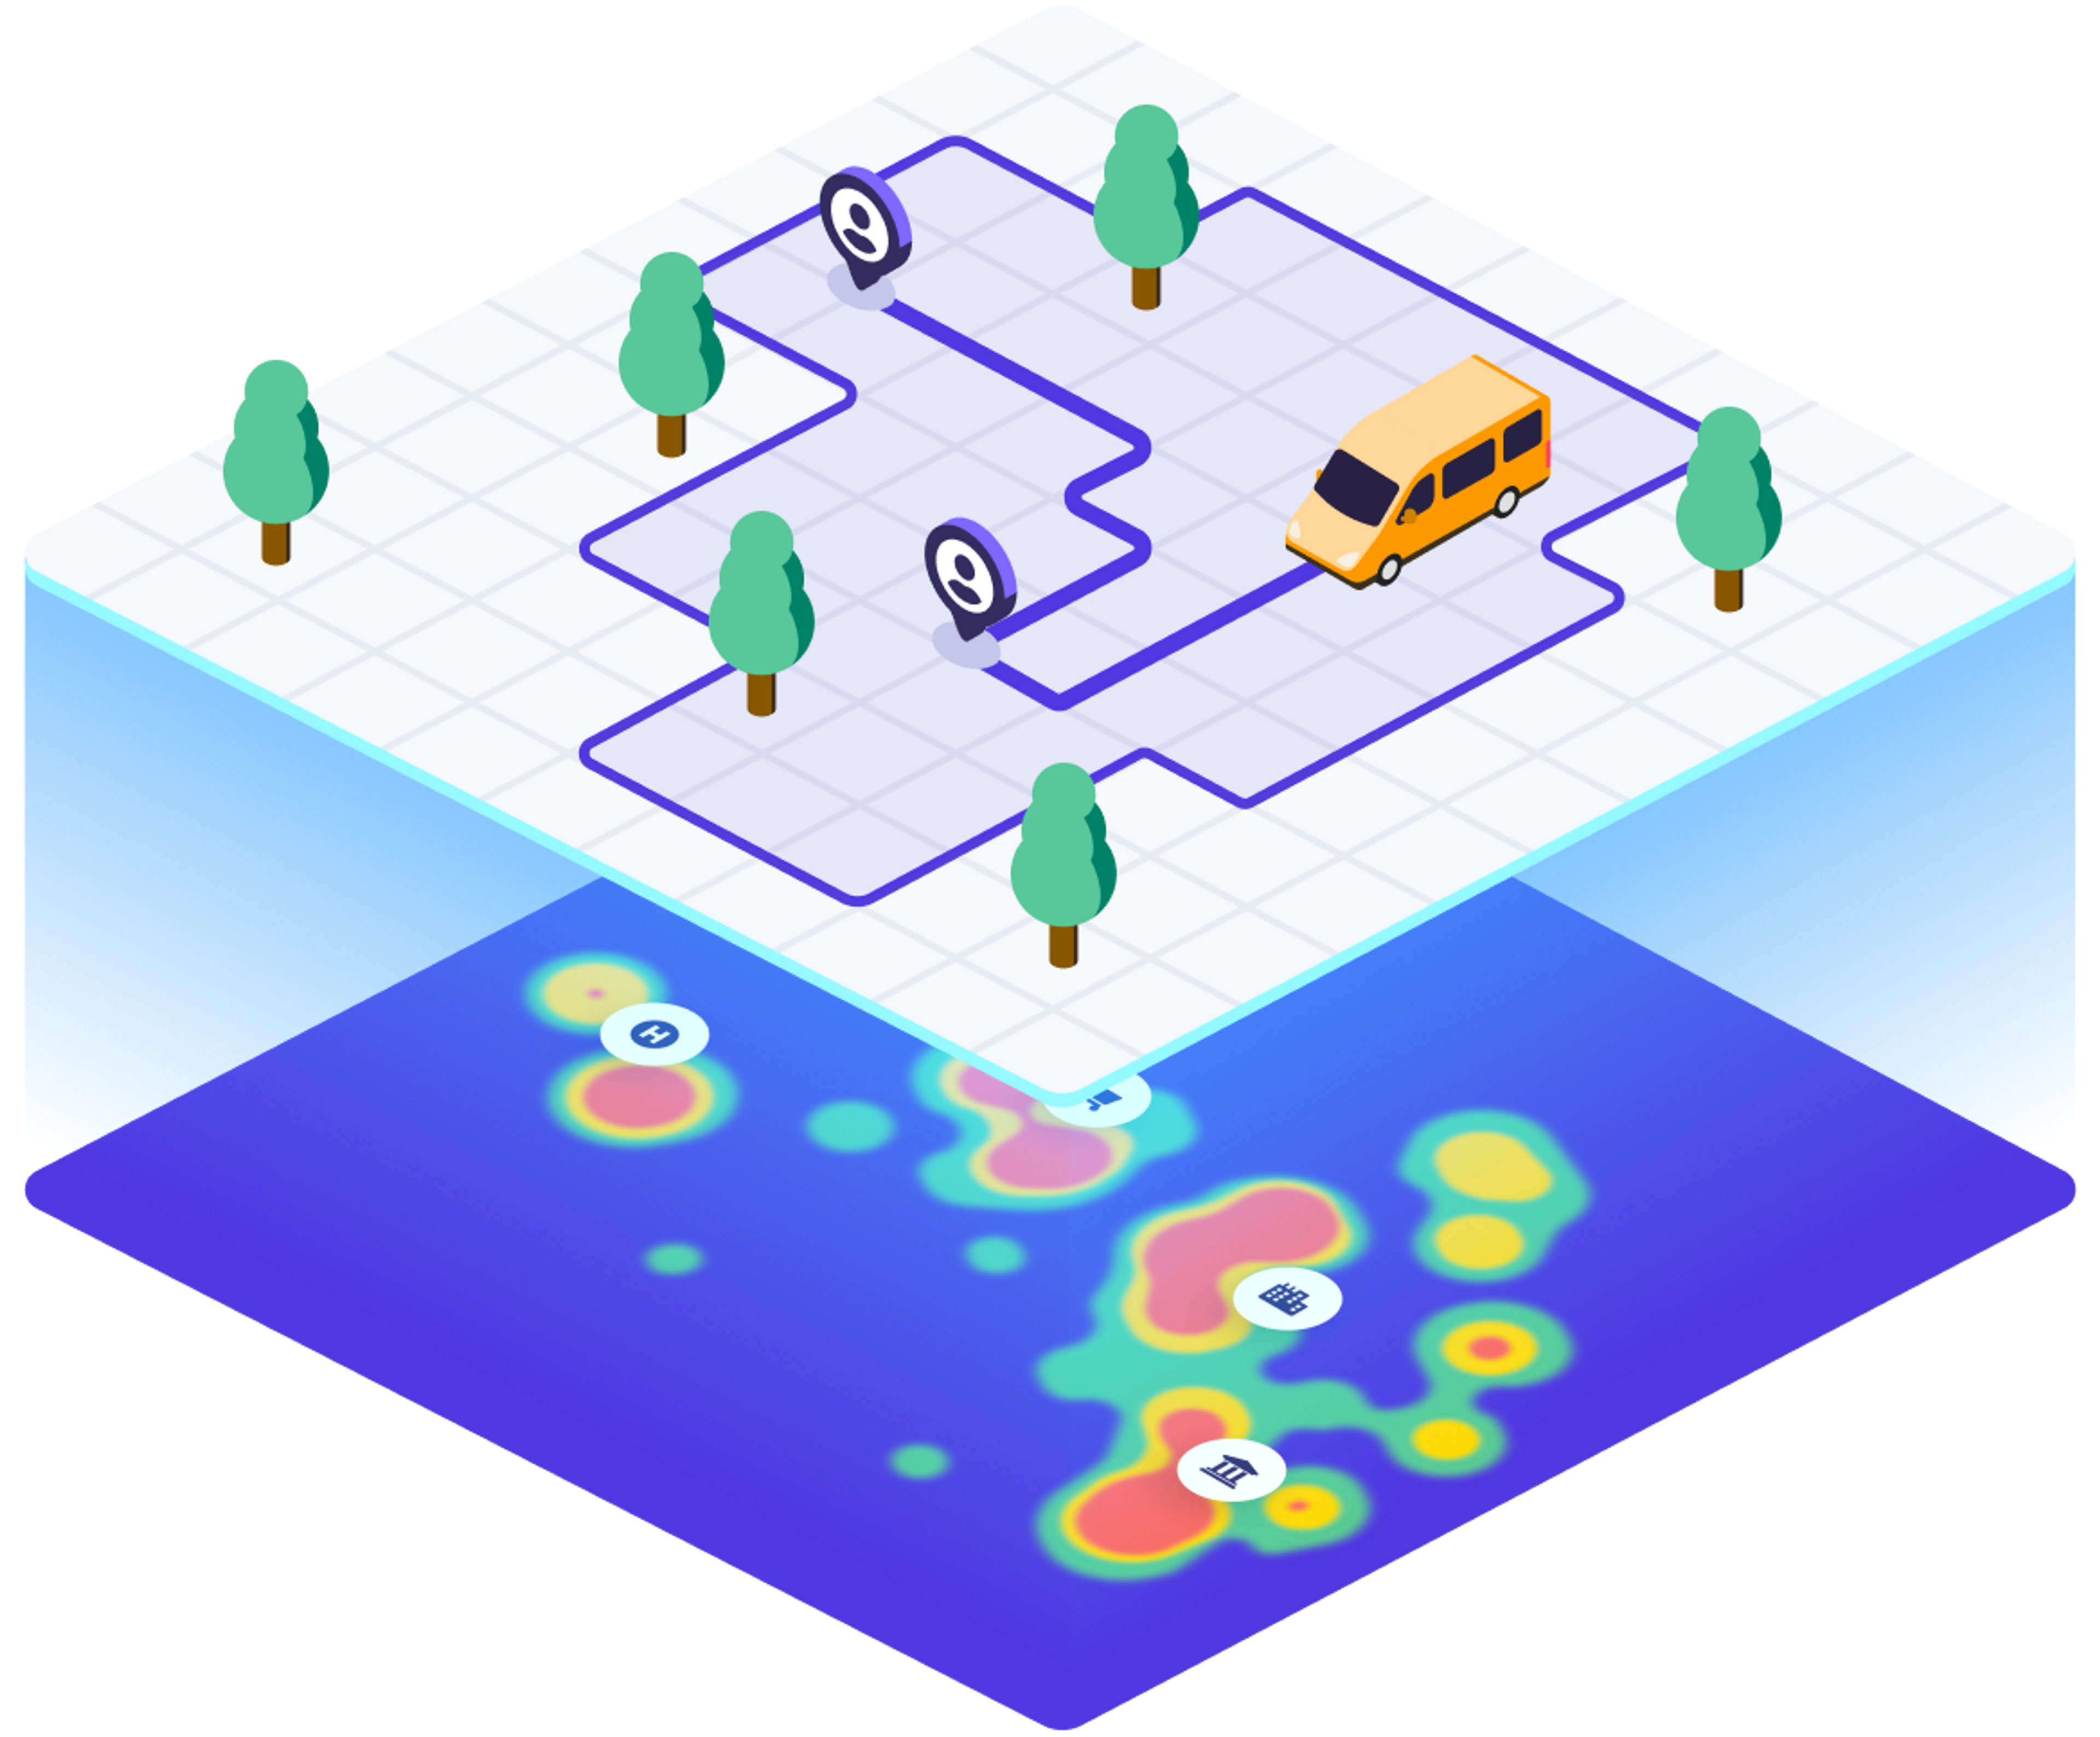 Floating city with heat map beneath